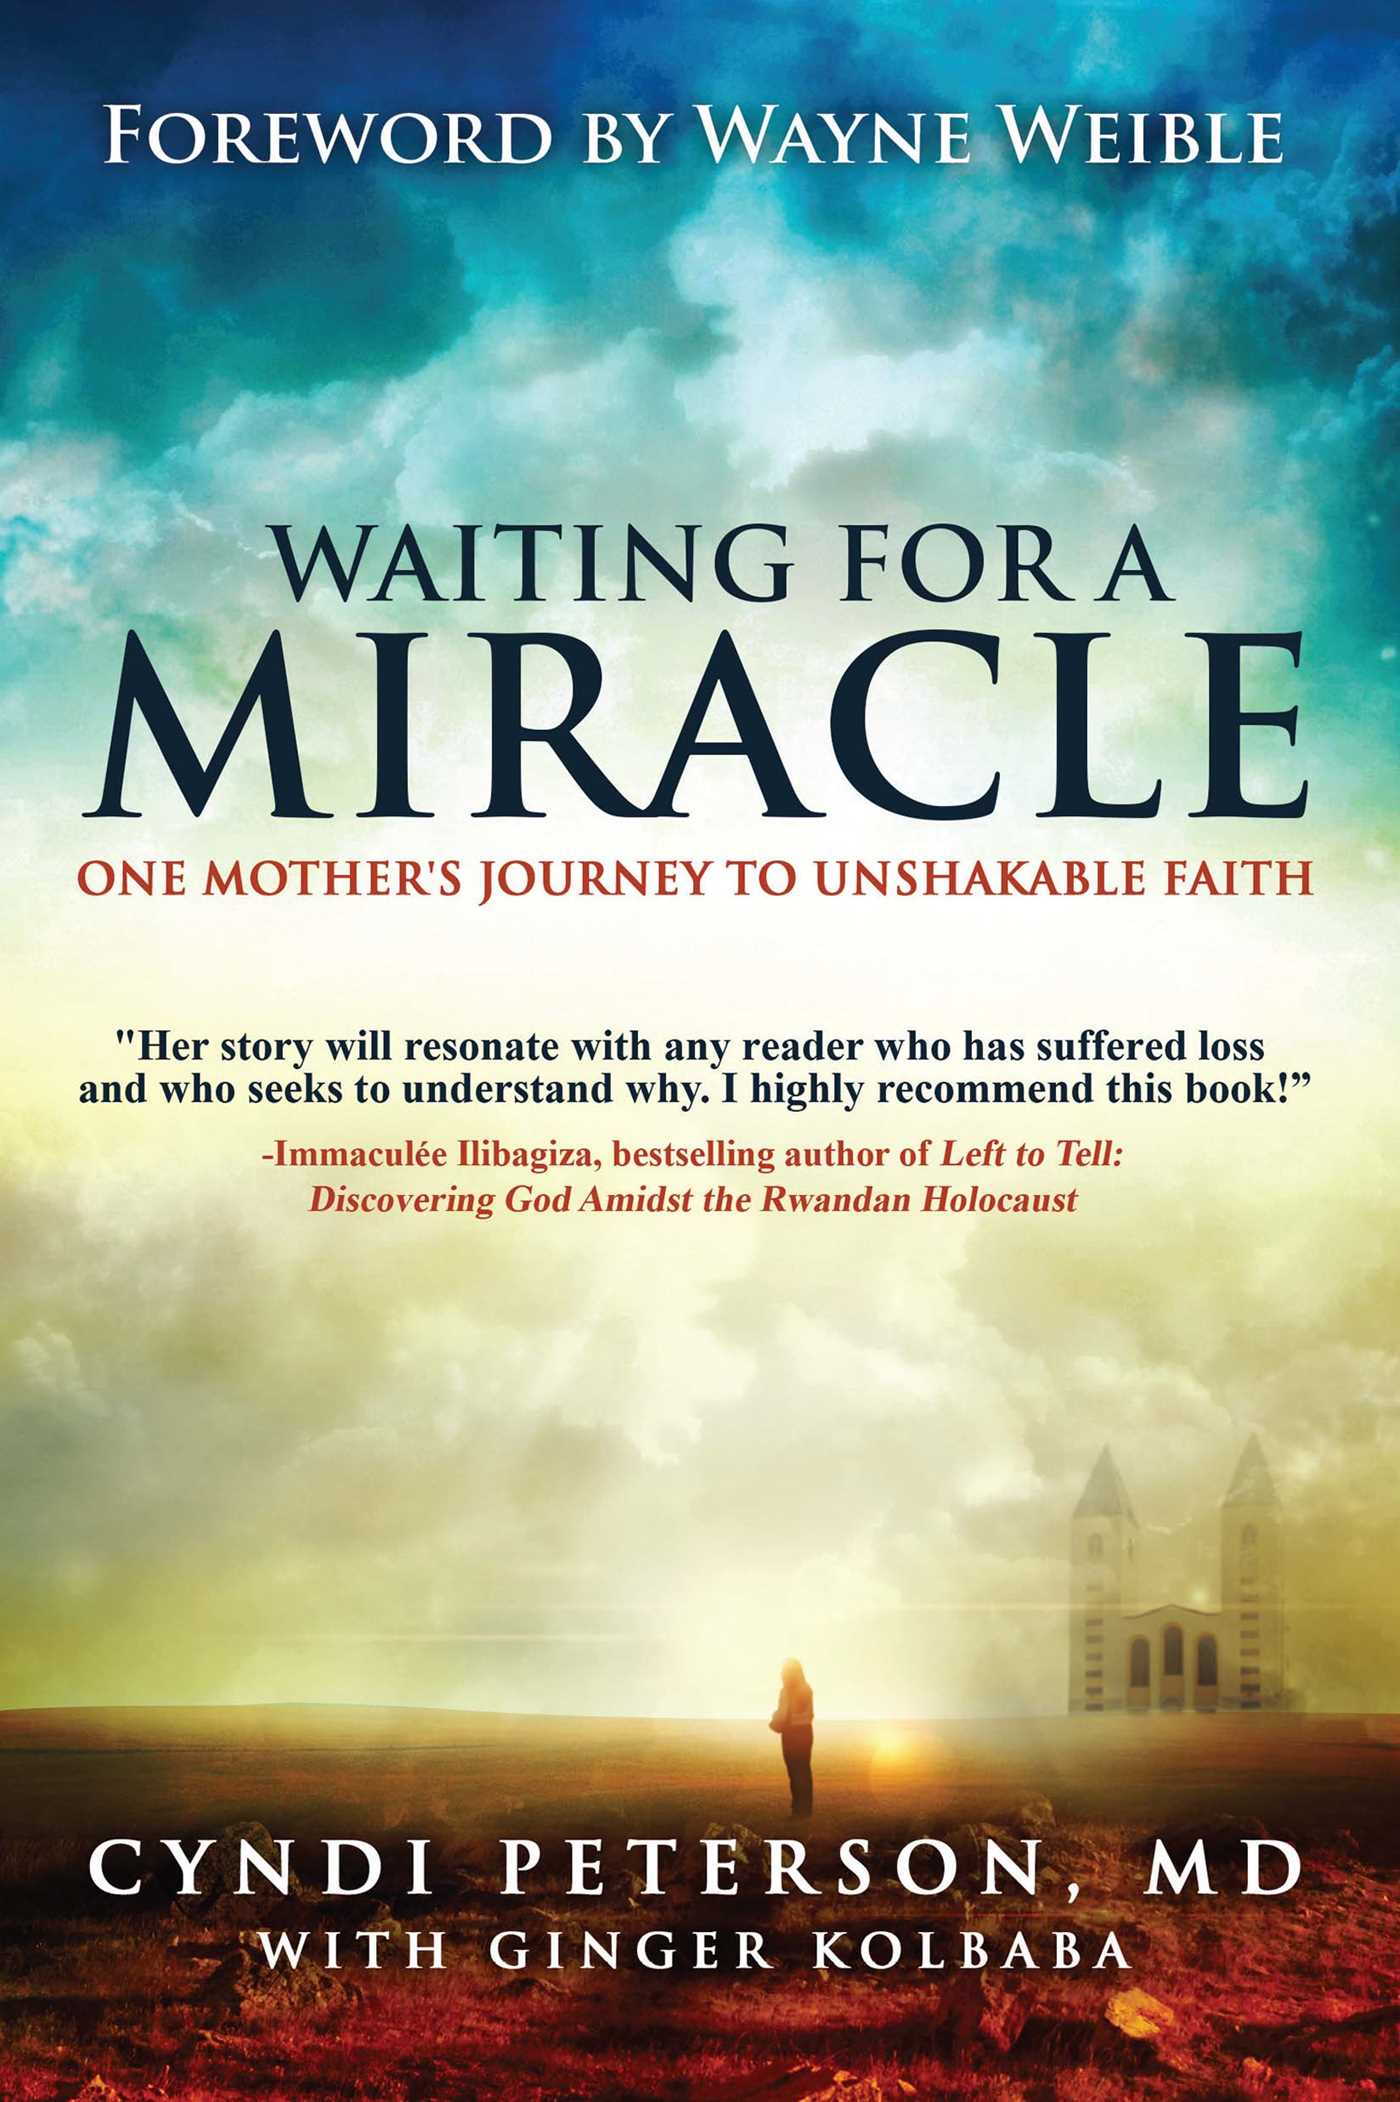 Waiting for a Miracle | Book by Cyndi Peterson MD, Ginger Kolbaba ...